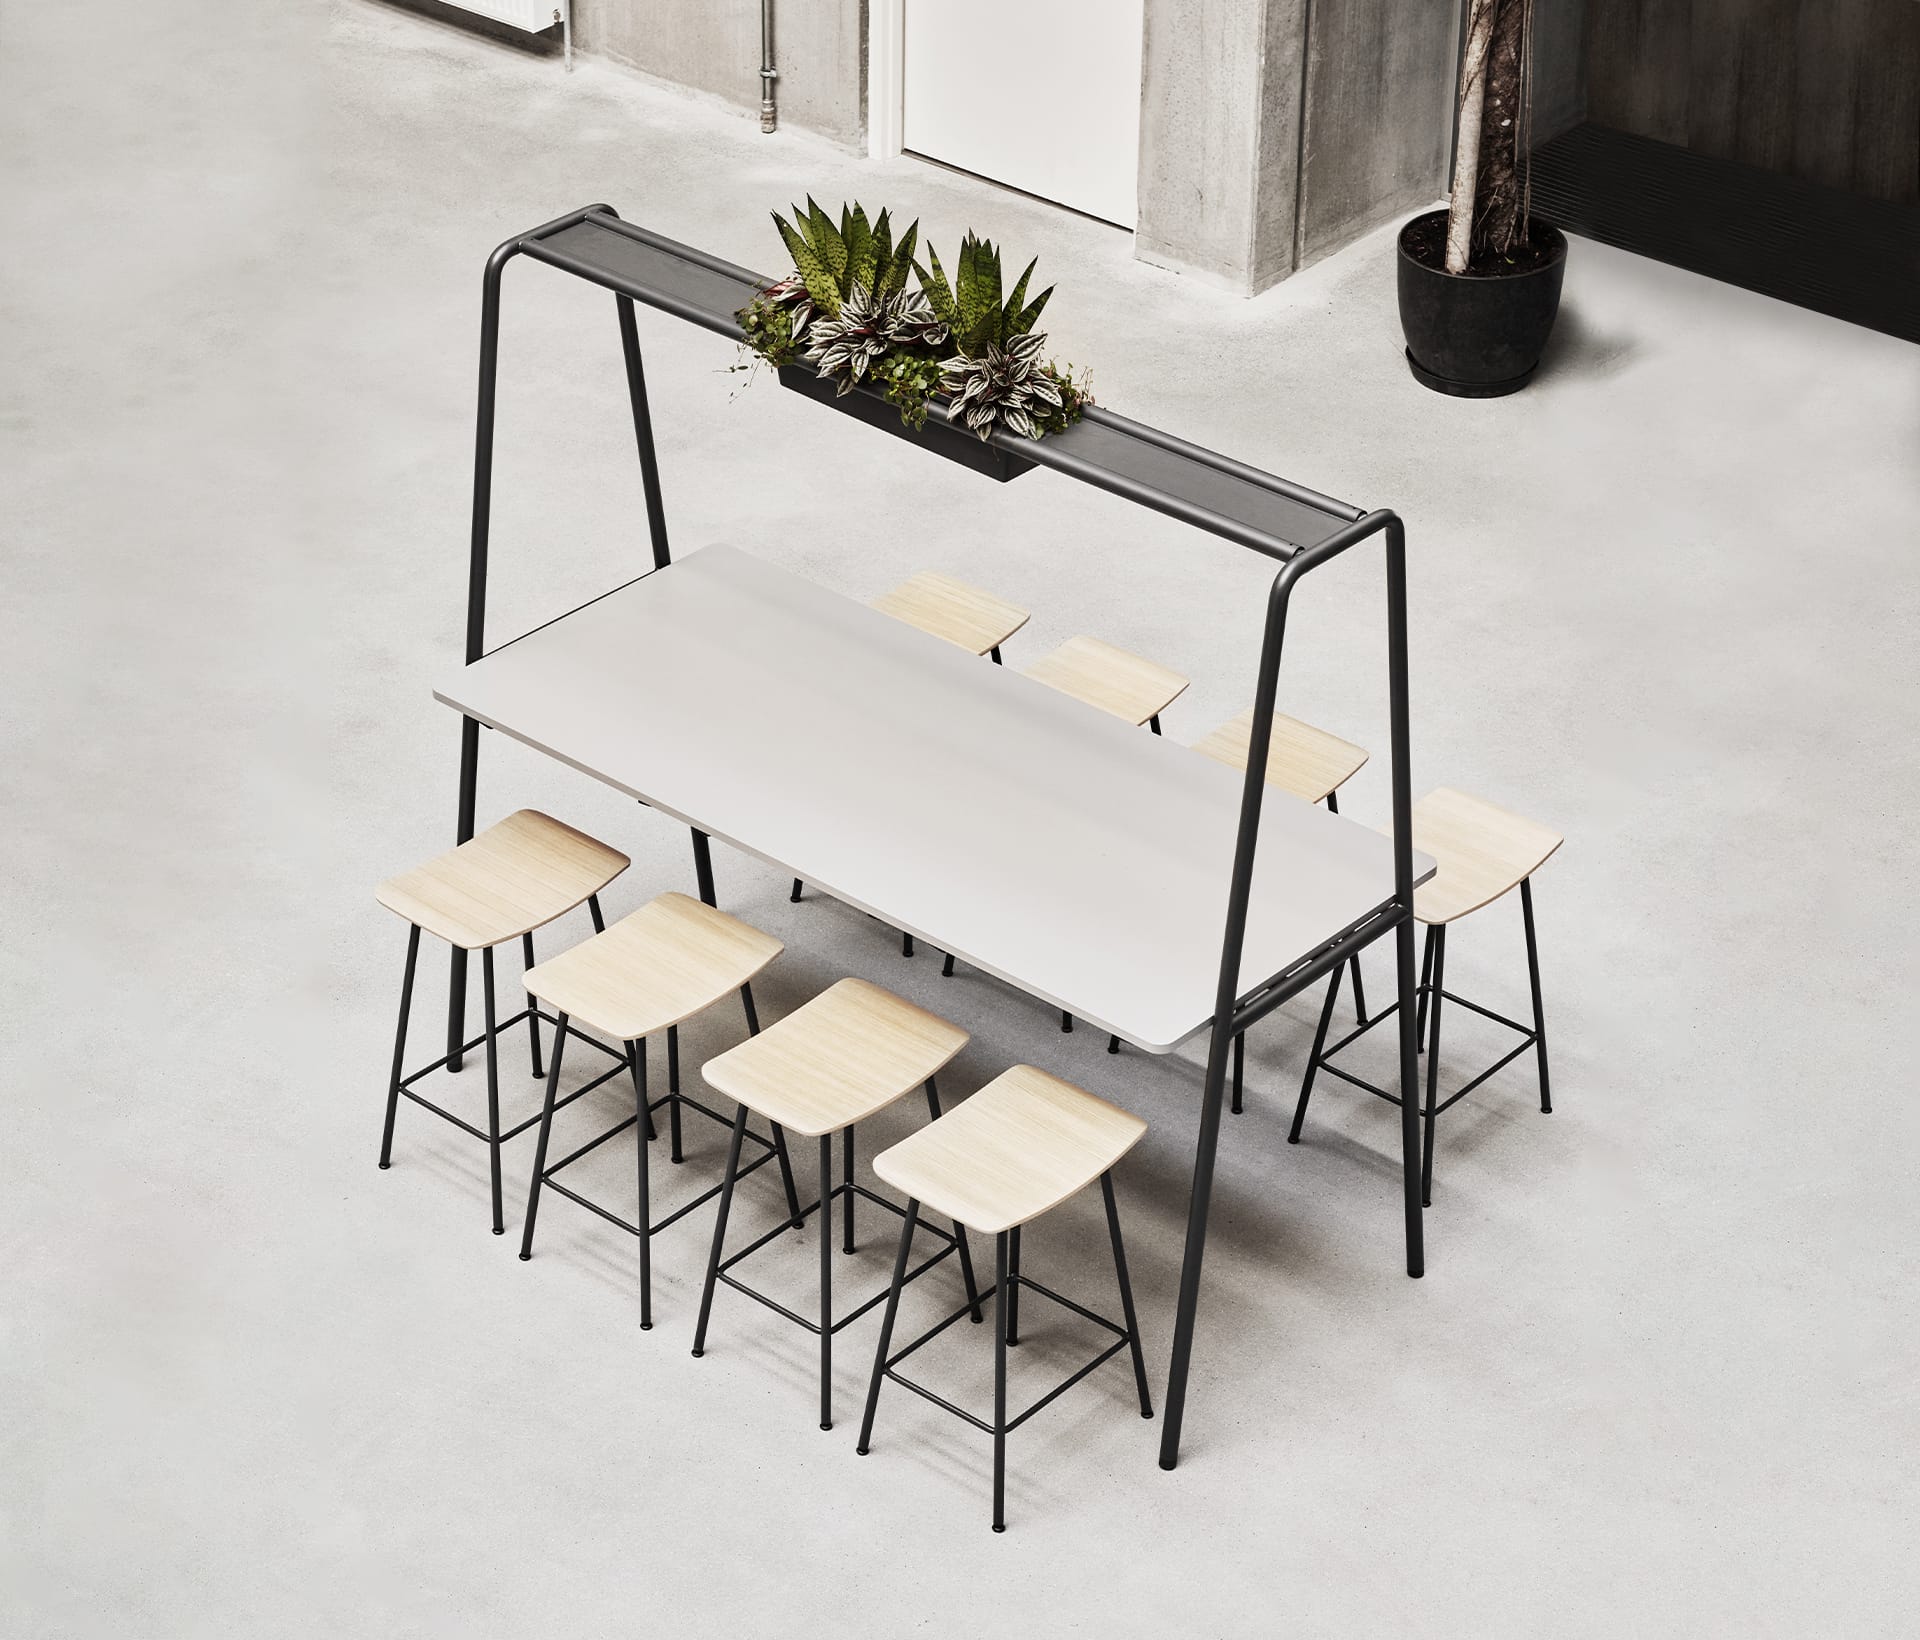 A table with office stools and a plant in the middle.